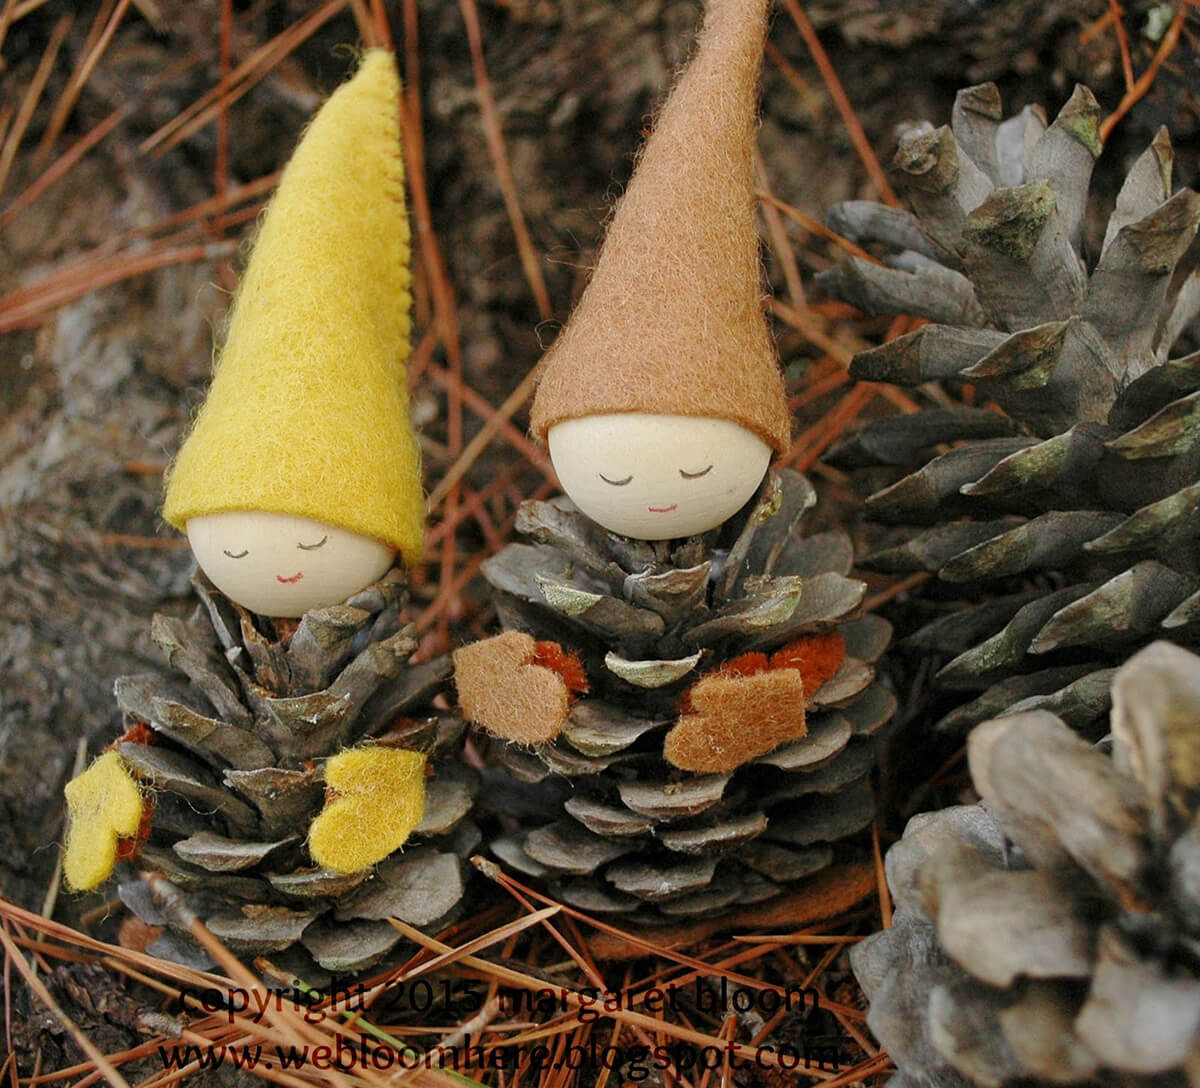 Adorable Crafted Sleepy Pinecone Gnomes